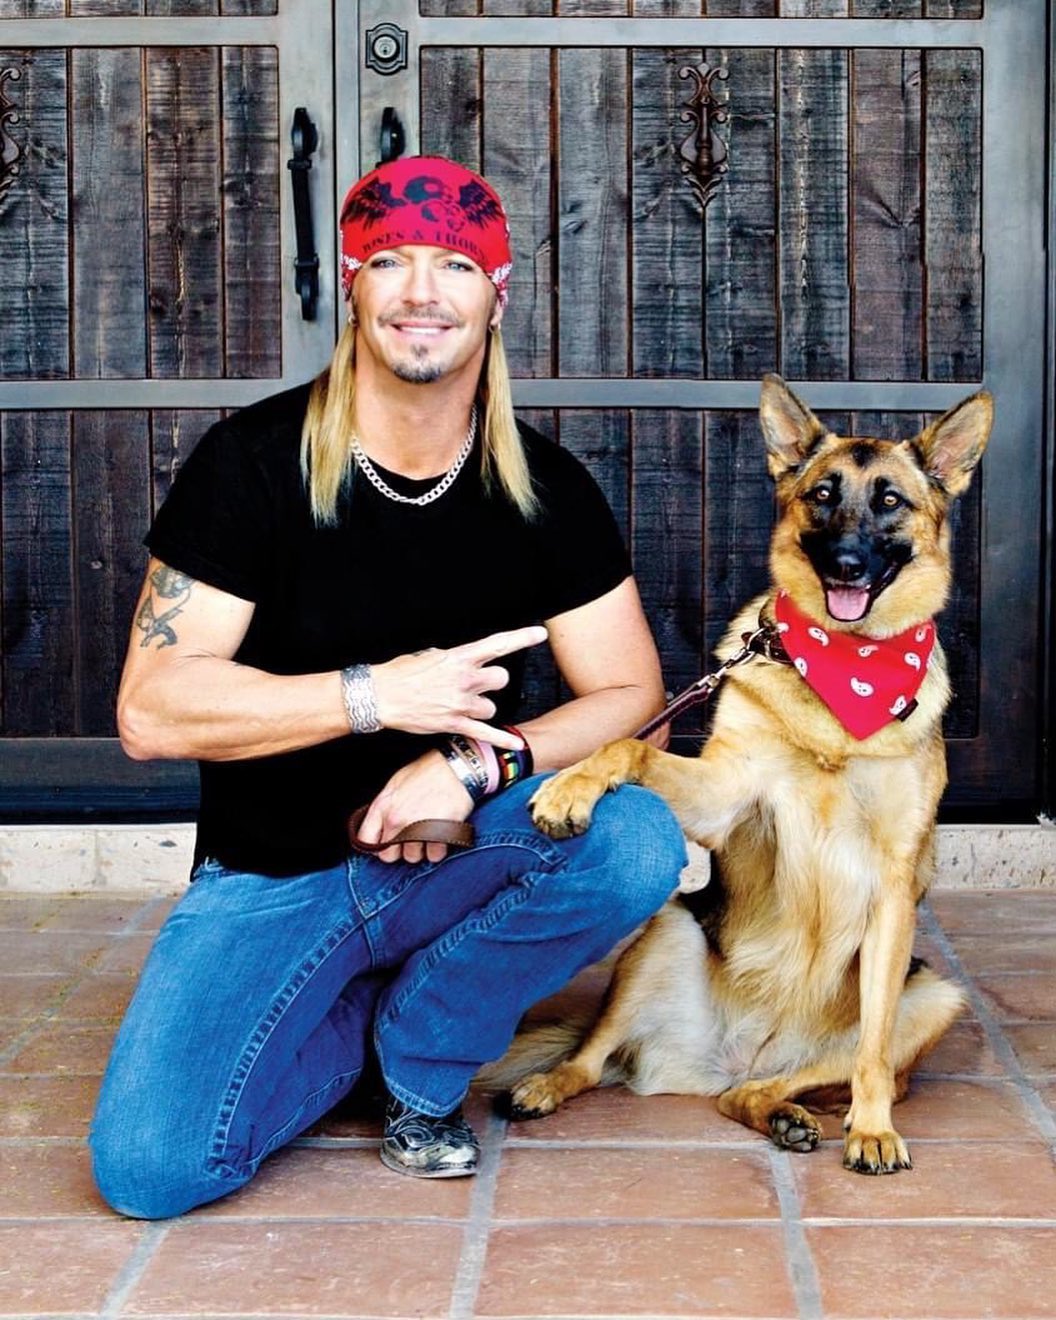 Bret Michaels Biography: Wife, Songs, Age, Band, Net Worth, Children, Tour, Daughter